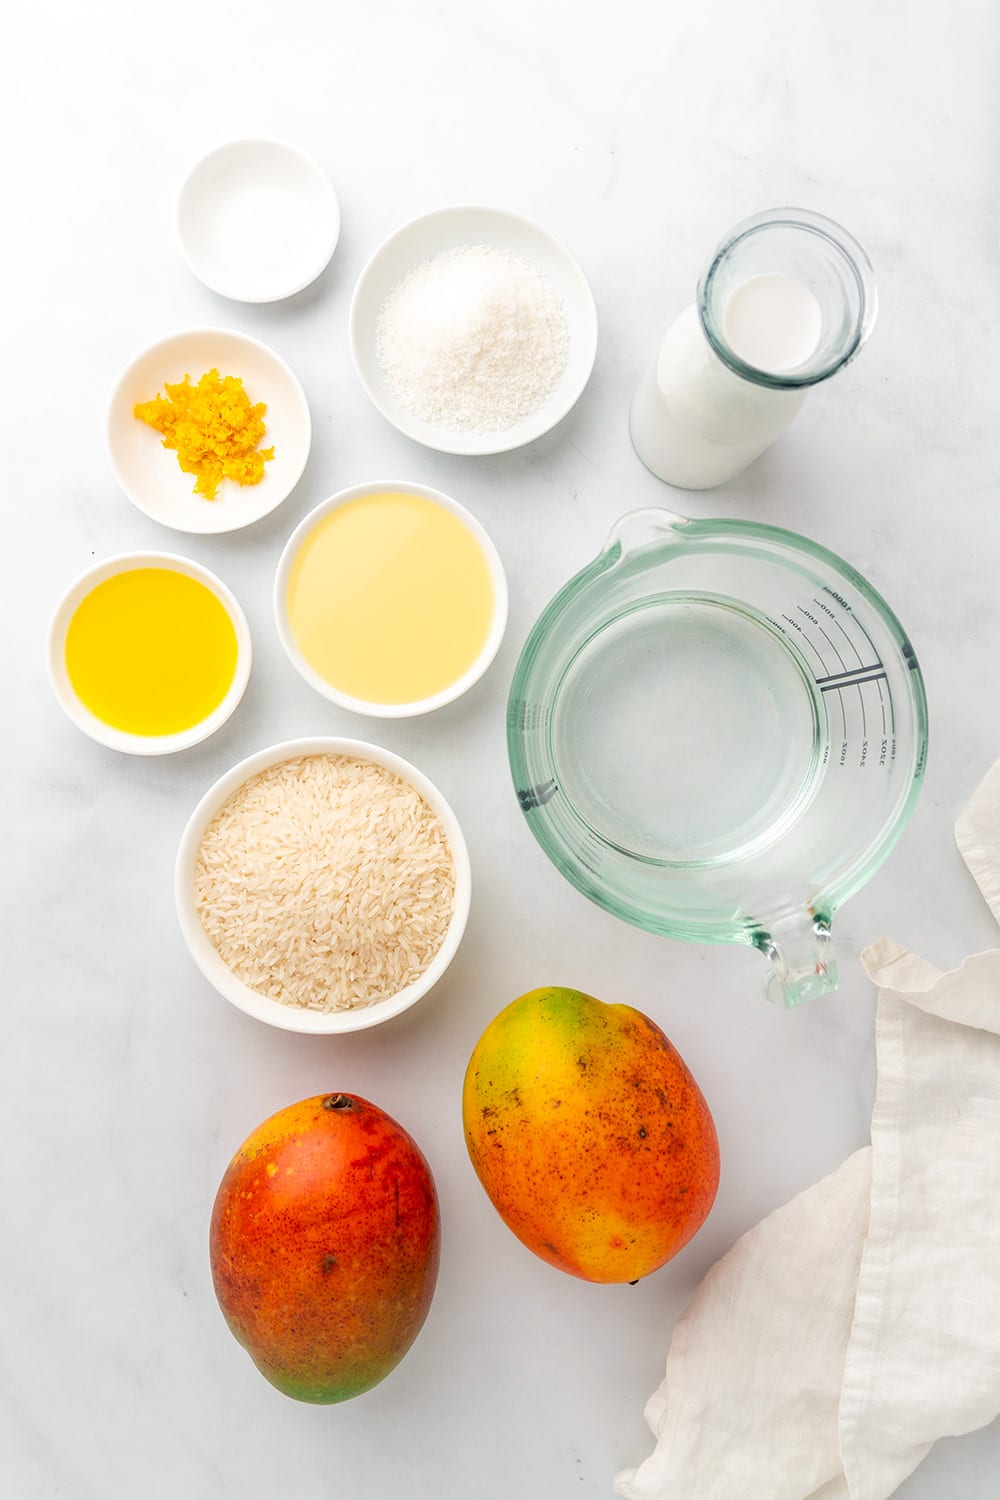 Ingredients for Instant Pot Coconut Rice Pudding